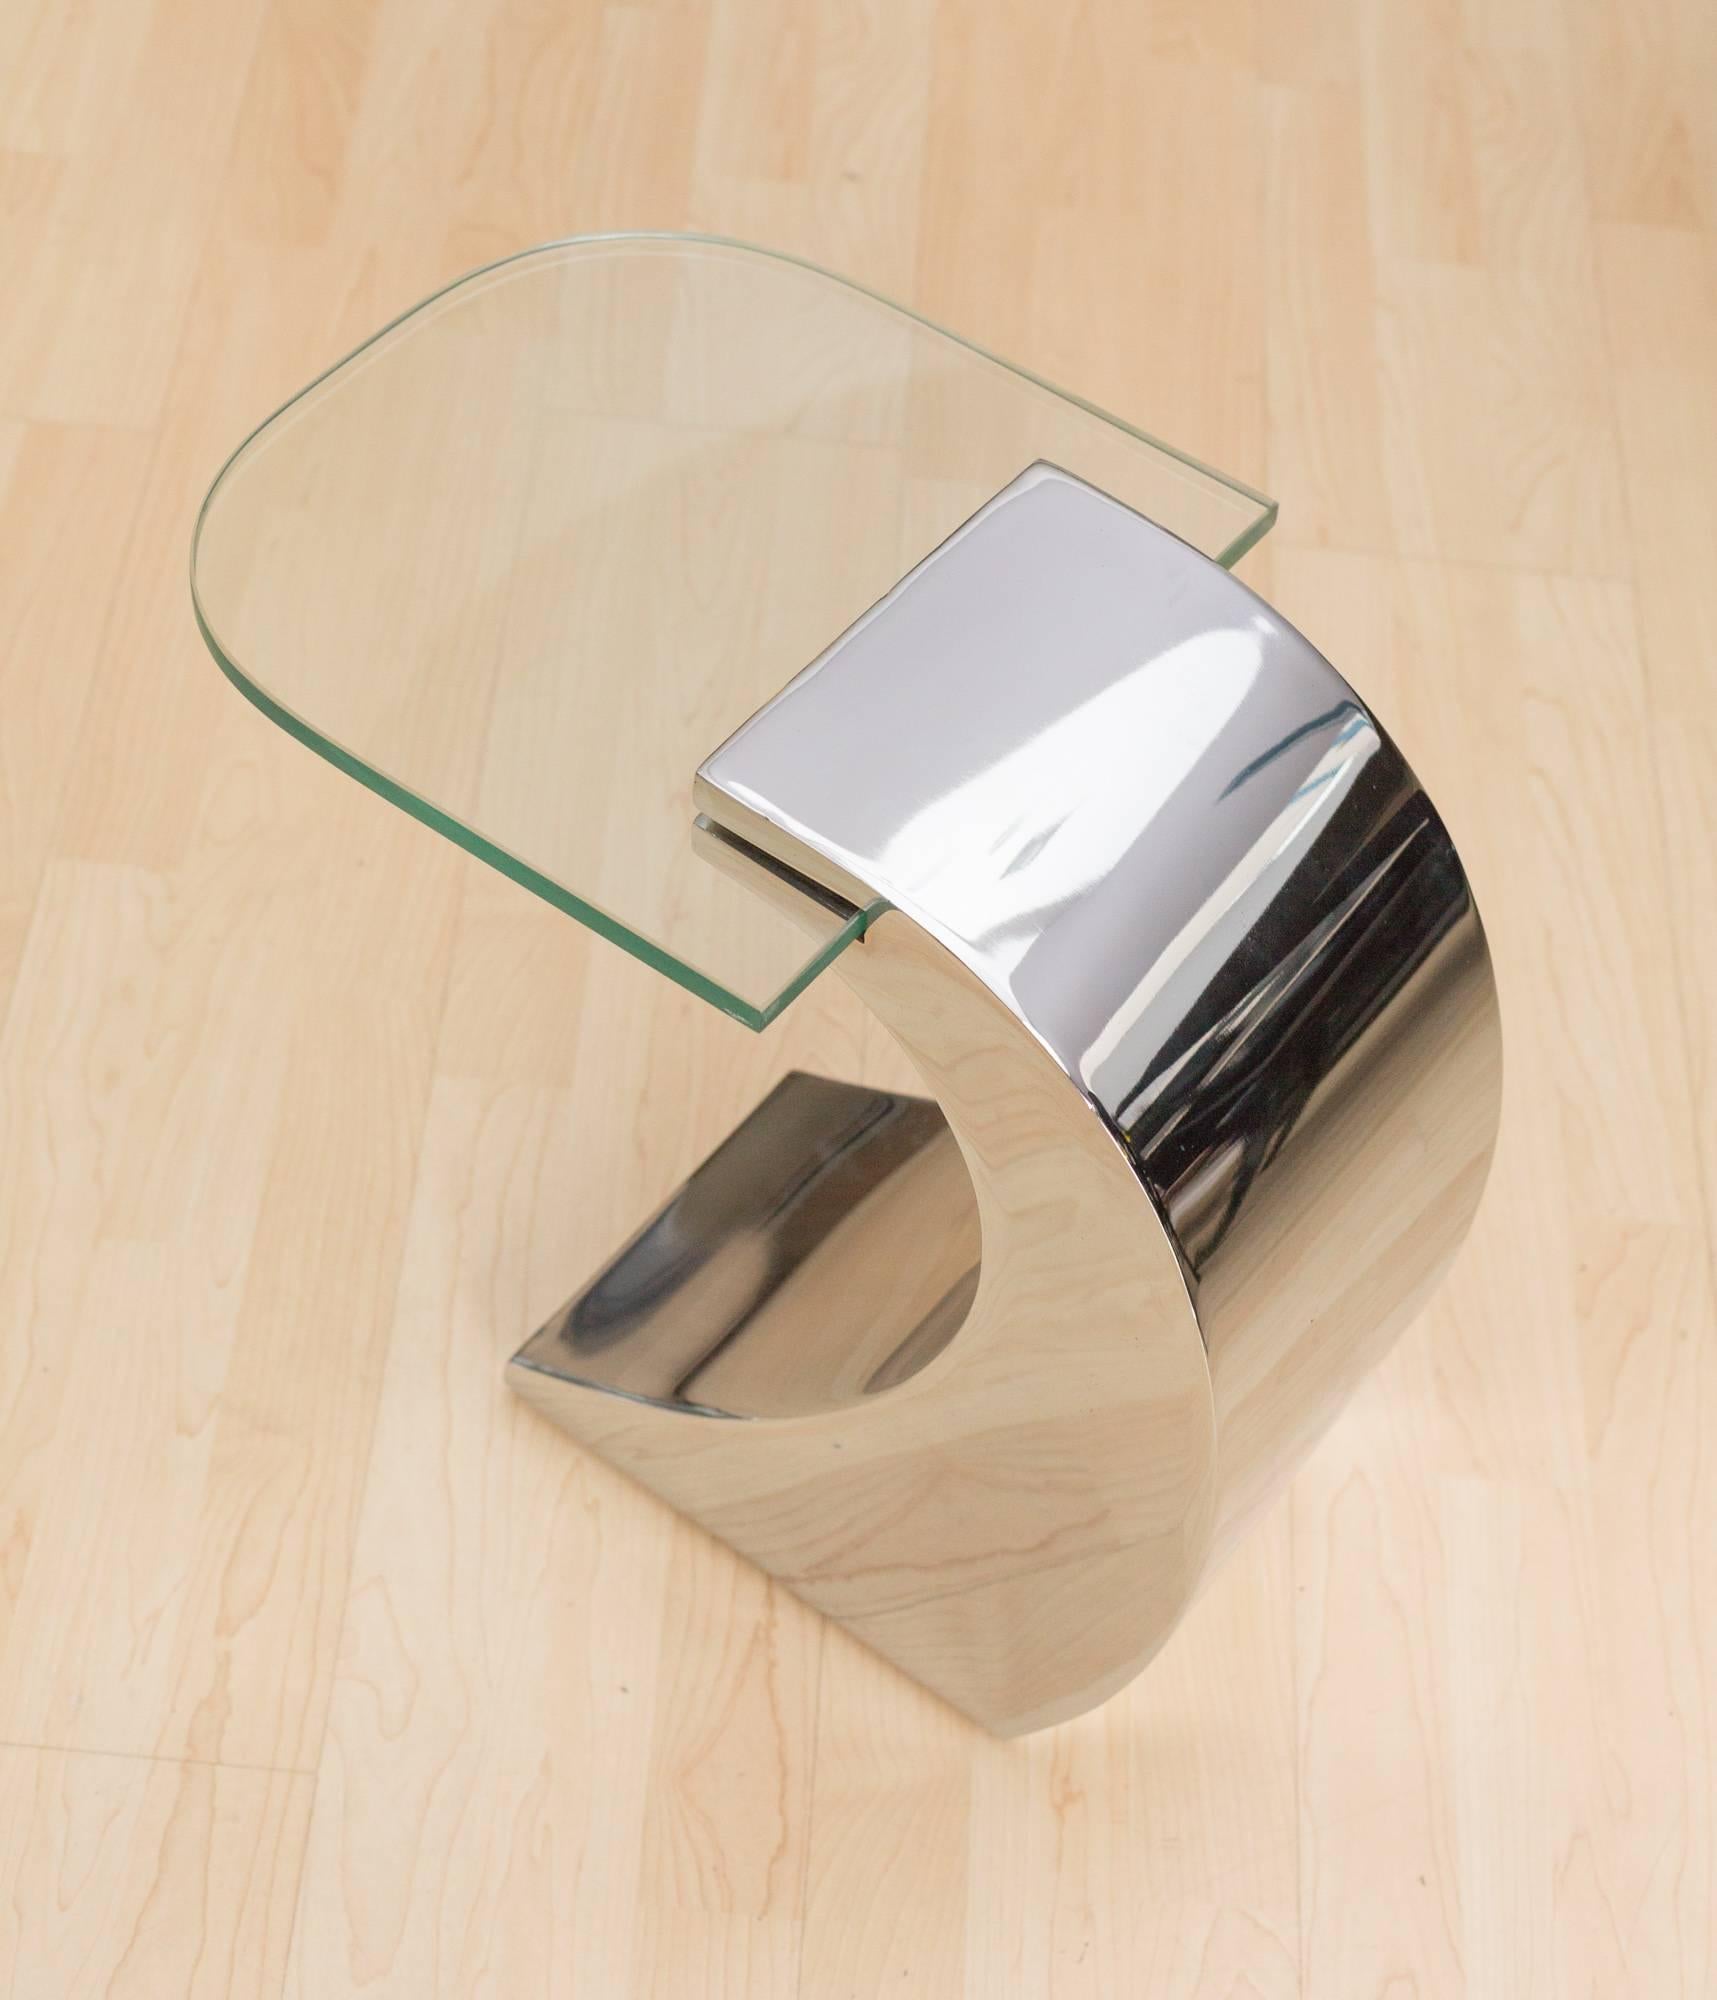 Set of 3 Wave Side tables by Pierre Cardin
With thick glass top (12"x12")
cantilevered from a wave shaped stainless steel base
(10" D x 8" W x 17" H) in mirrored finish.